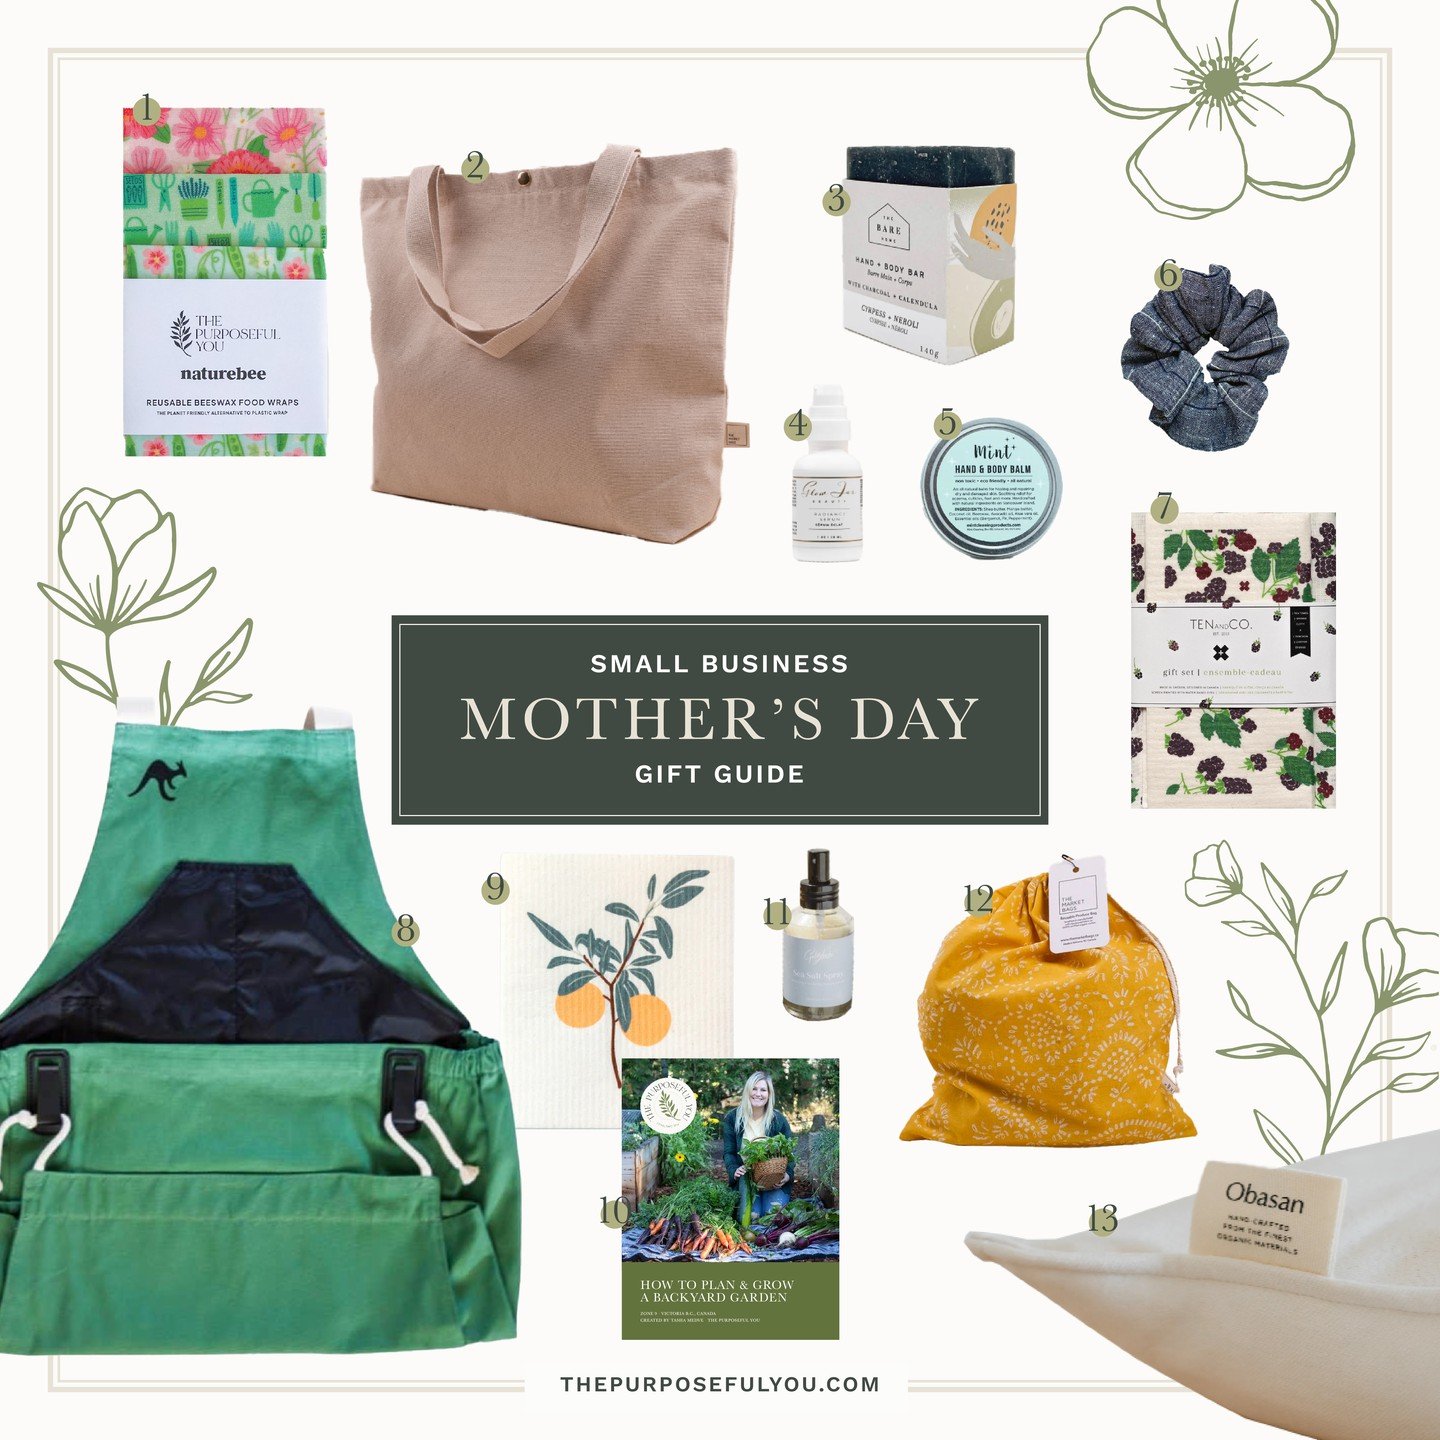 💐 Mother&rsquo;s Day is coming up FAST, so it&rsquo;s time to start thinking about shopping for mom!⁠
⁠
I&rsquo;ve created not one, but TWO gift guides just for you, including some of my fave small businesses like @naturebeegoods, @therooapron, @oba